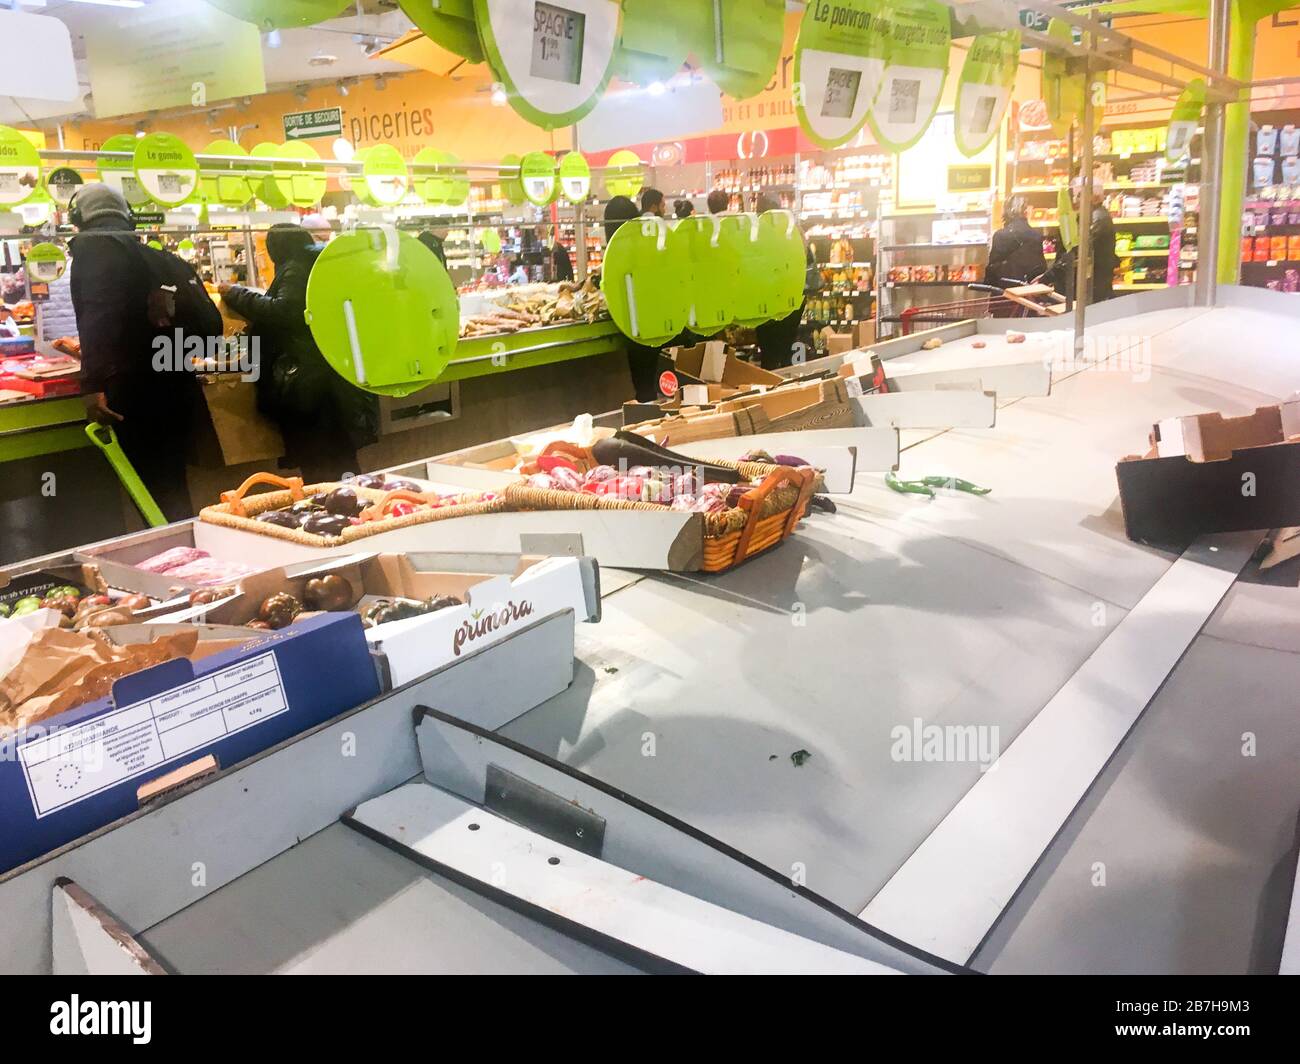 Covid-19 (Coronavitus) crisis: the fruits and vegetables shelves of a supermarket emptied by anxious citizens, Lyon, France Stock Photo